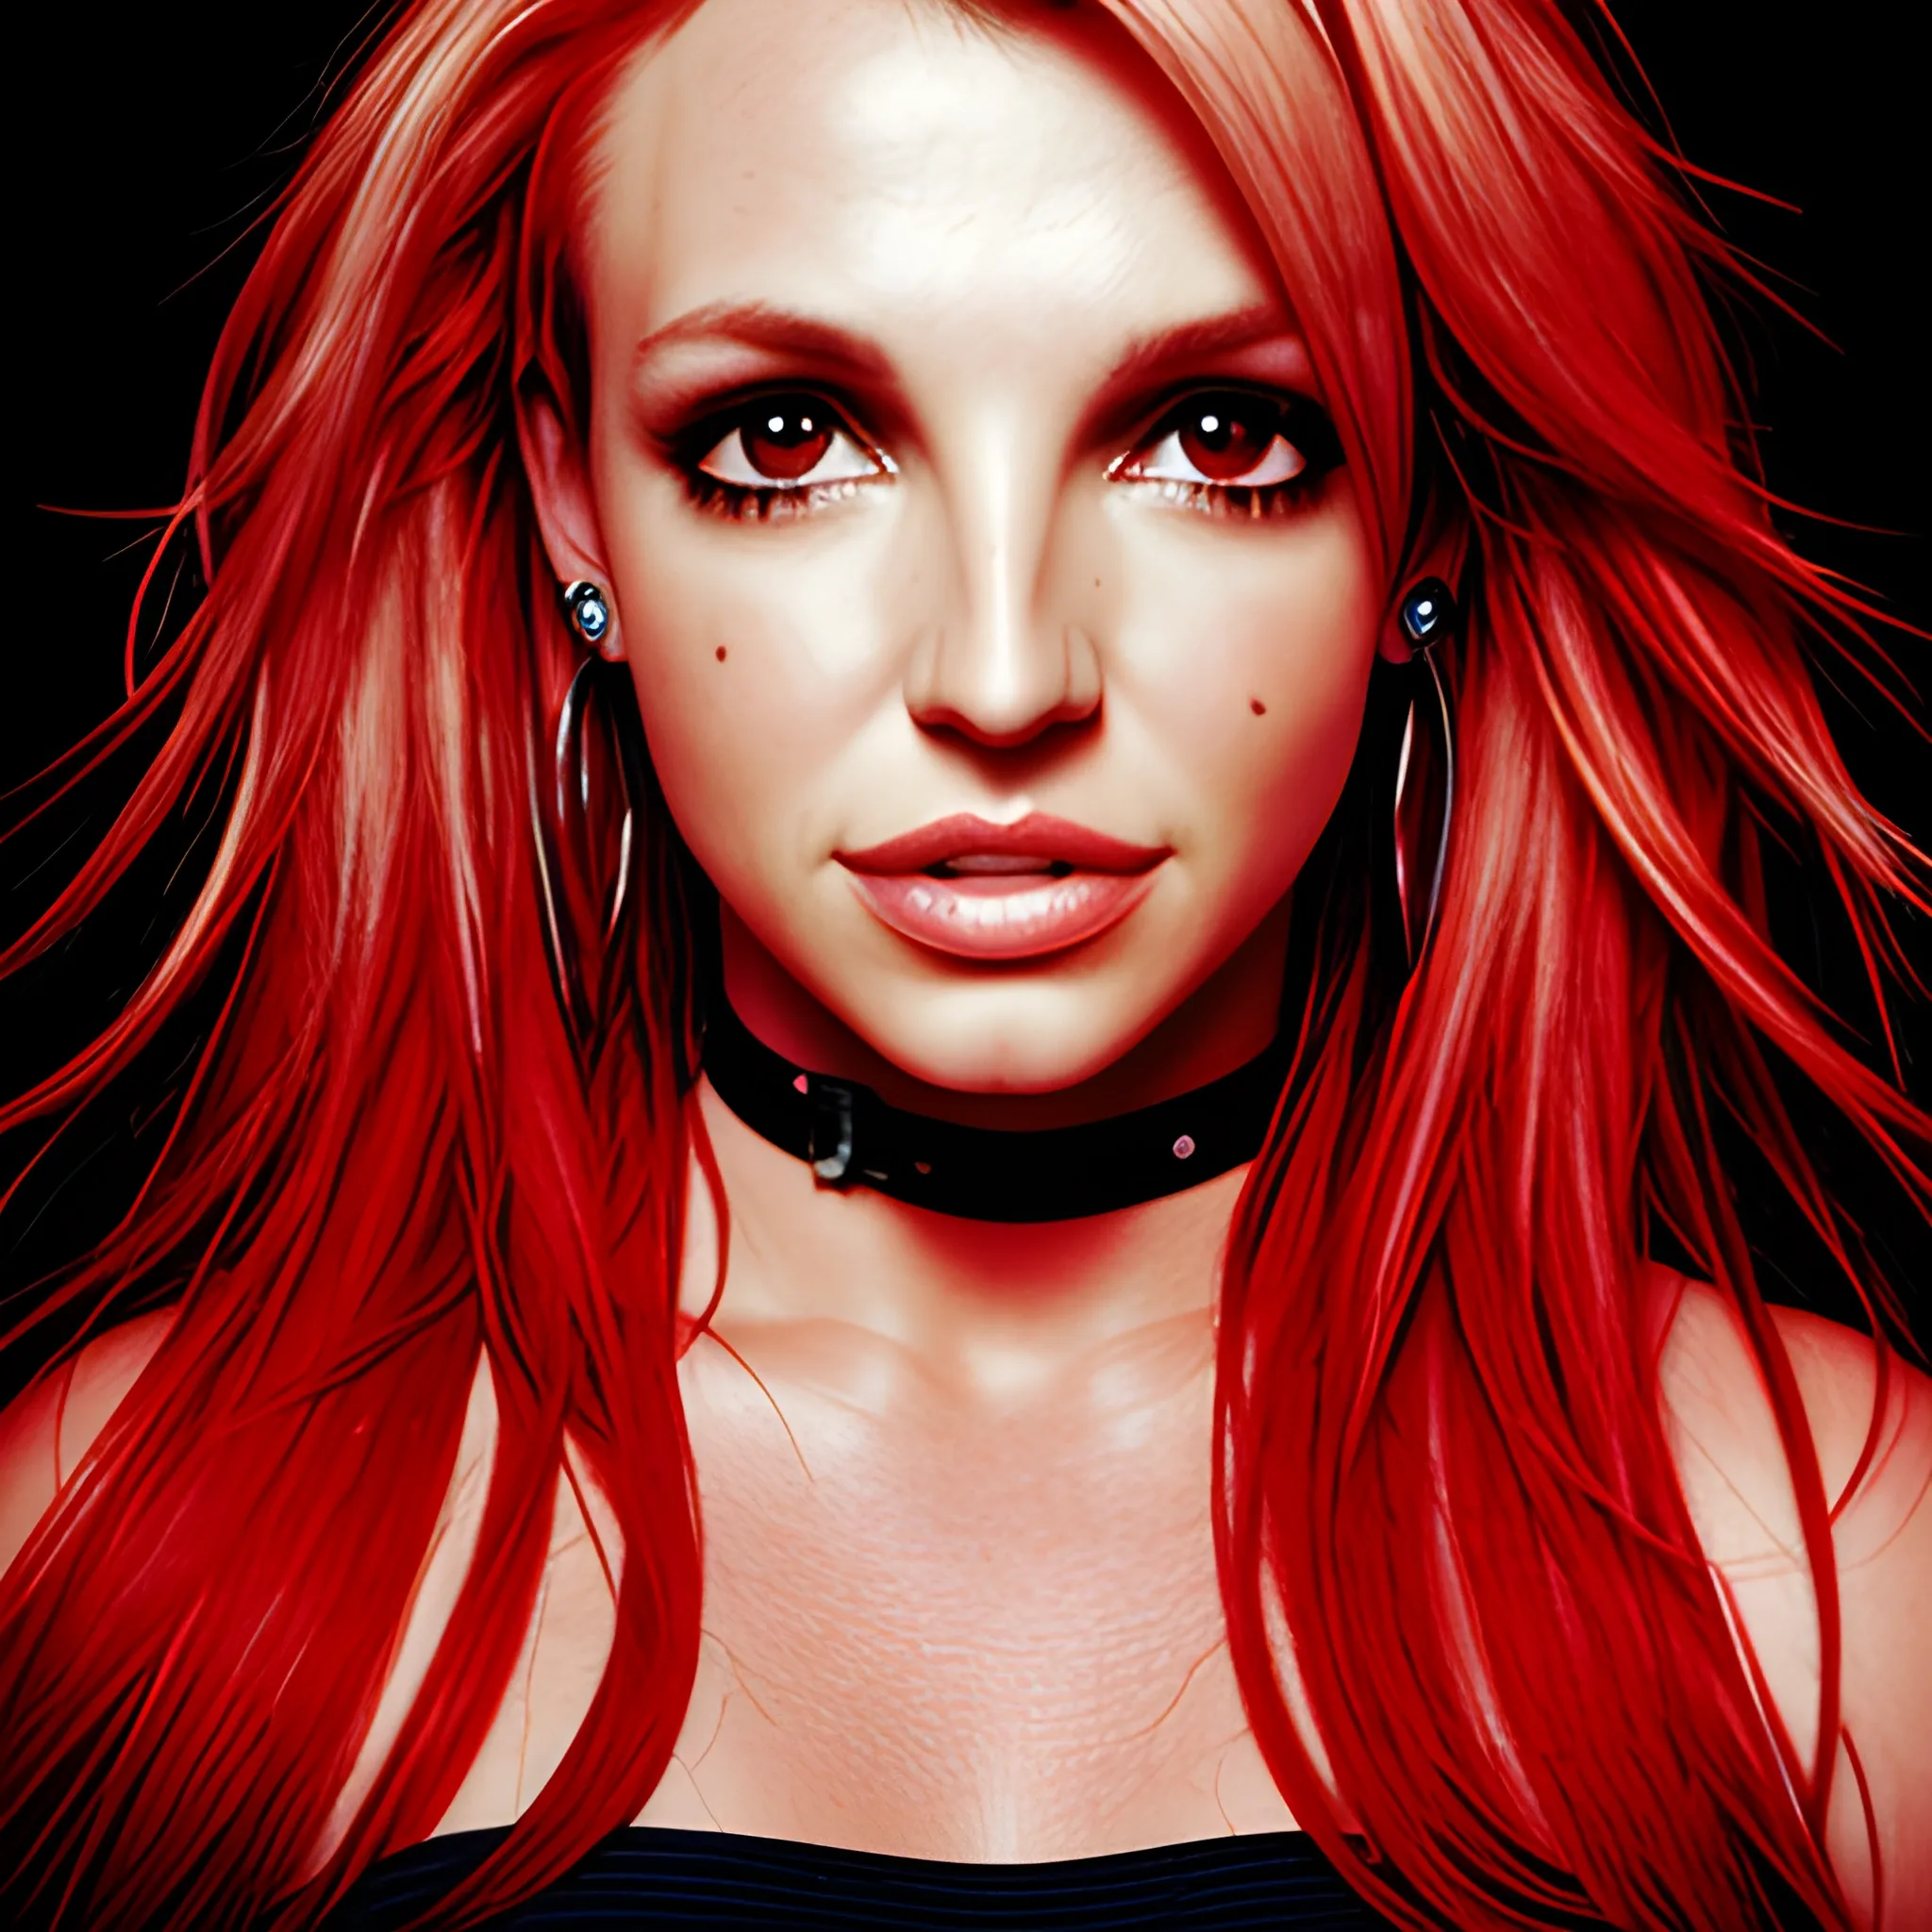 portrait, britney spears, red hair, crying